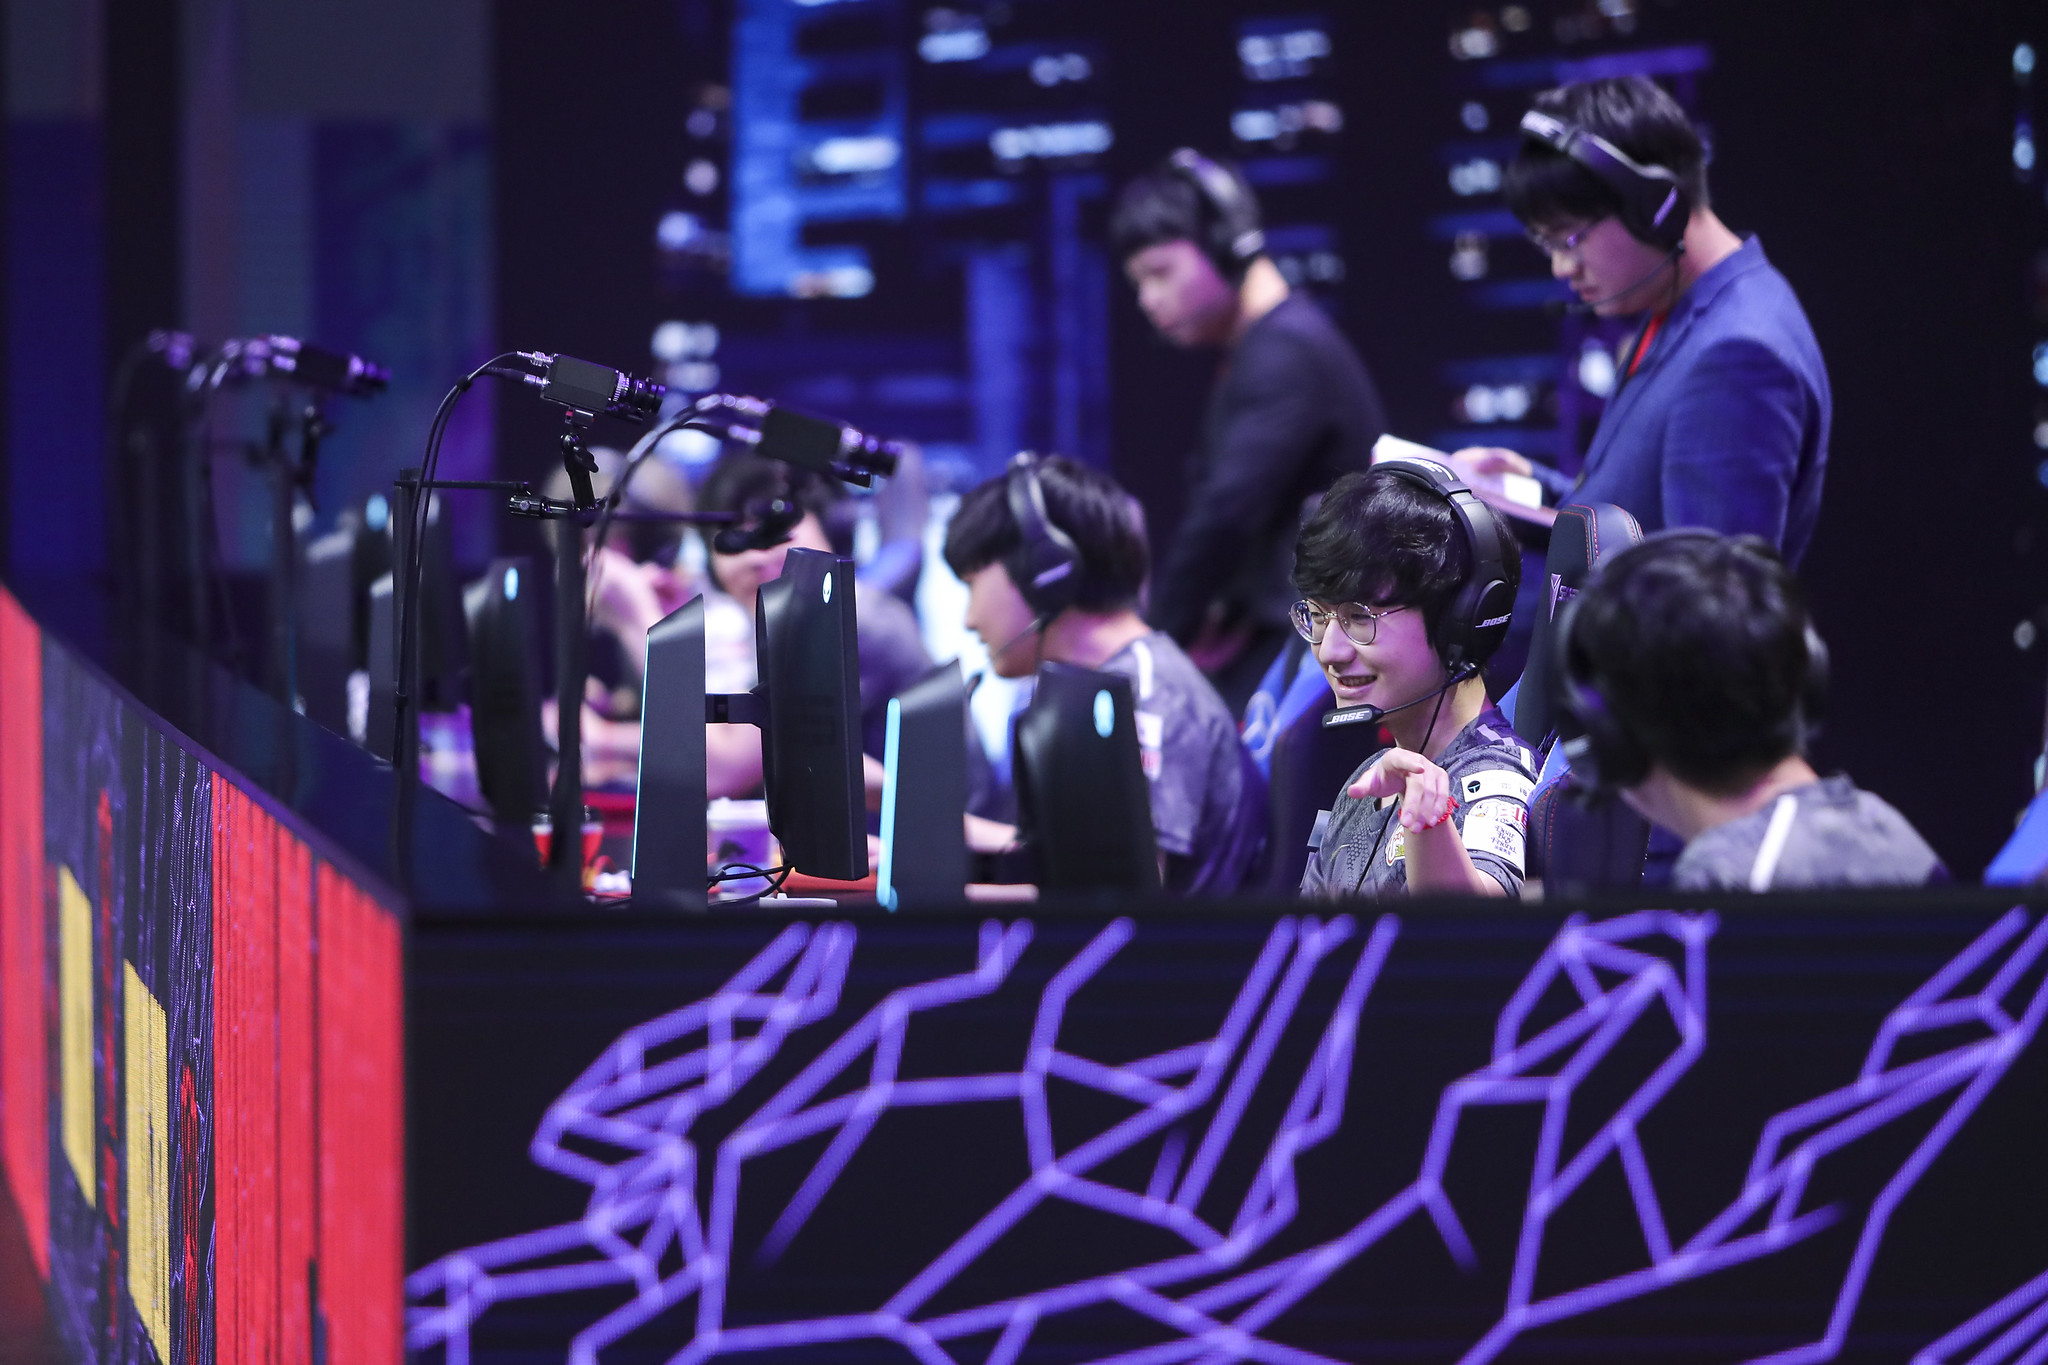 League Of Legends World Championship 2020 Main Group Event Day Seven: LGD Gaming Vs TSM